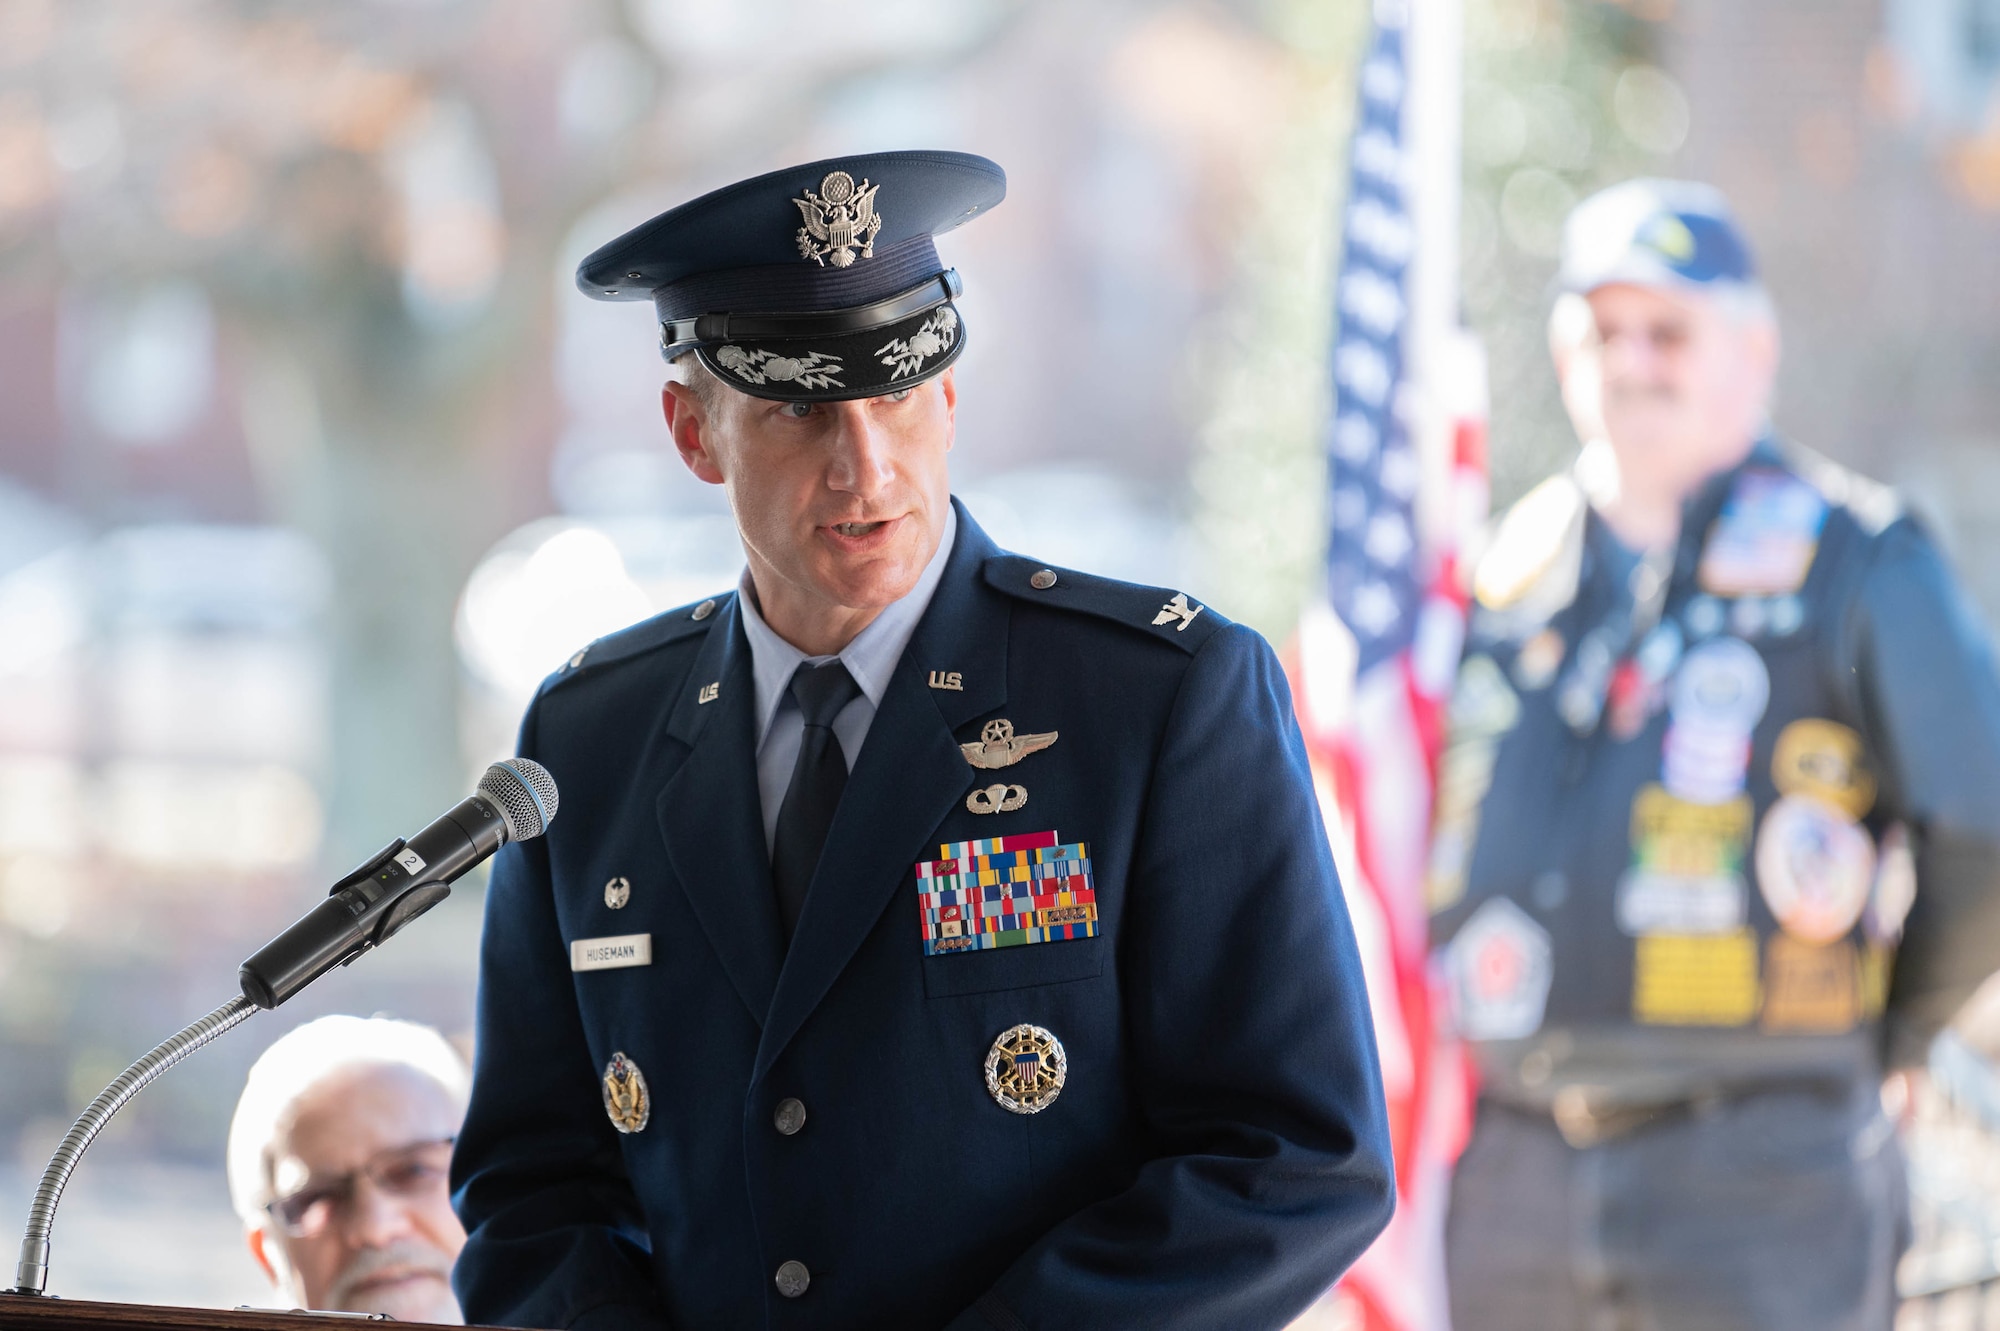 Col. Matt Husemann, 436th Airlift Wing commander, speaks at the Delaware Wreaths Across America event Dec. 13, 2021 in Dover, Delaware. After the ceremony, wreaths were laid at various war memorials in downtown Dover. (U.S. Air Force photo by Mauricio Campino)